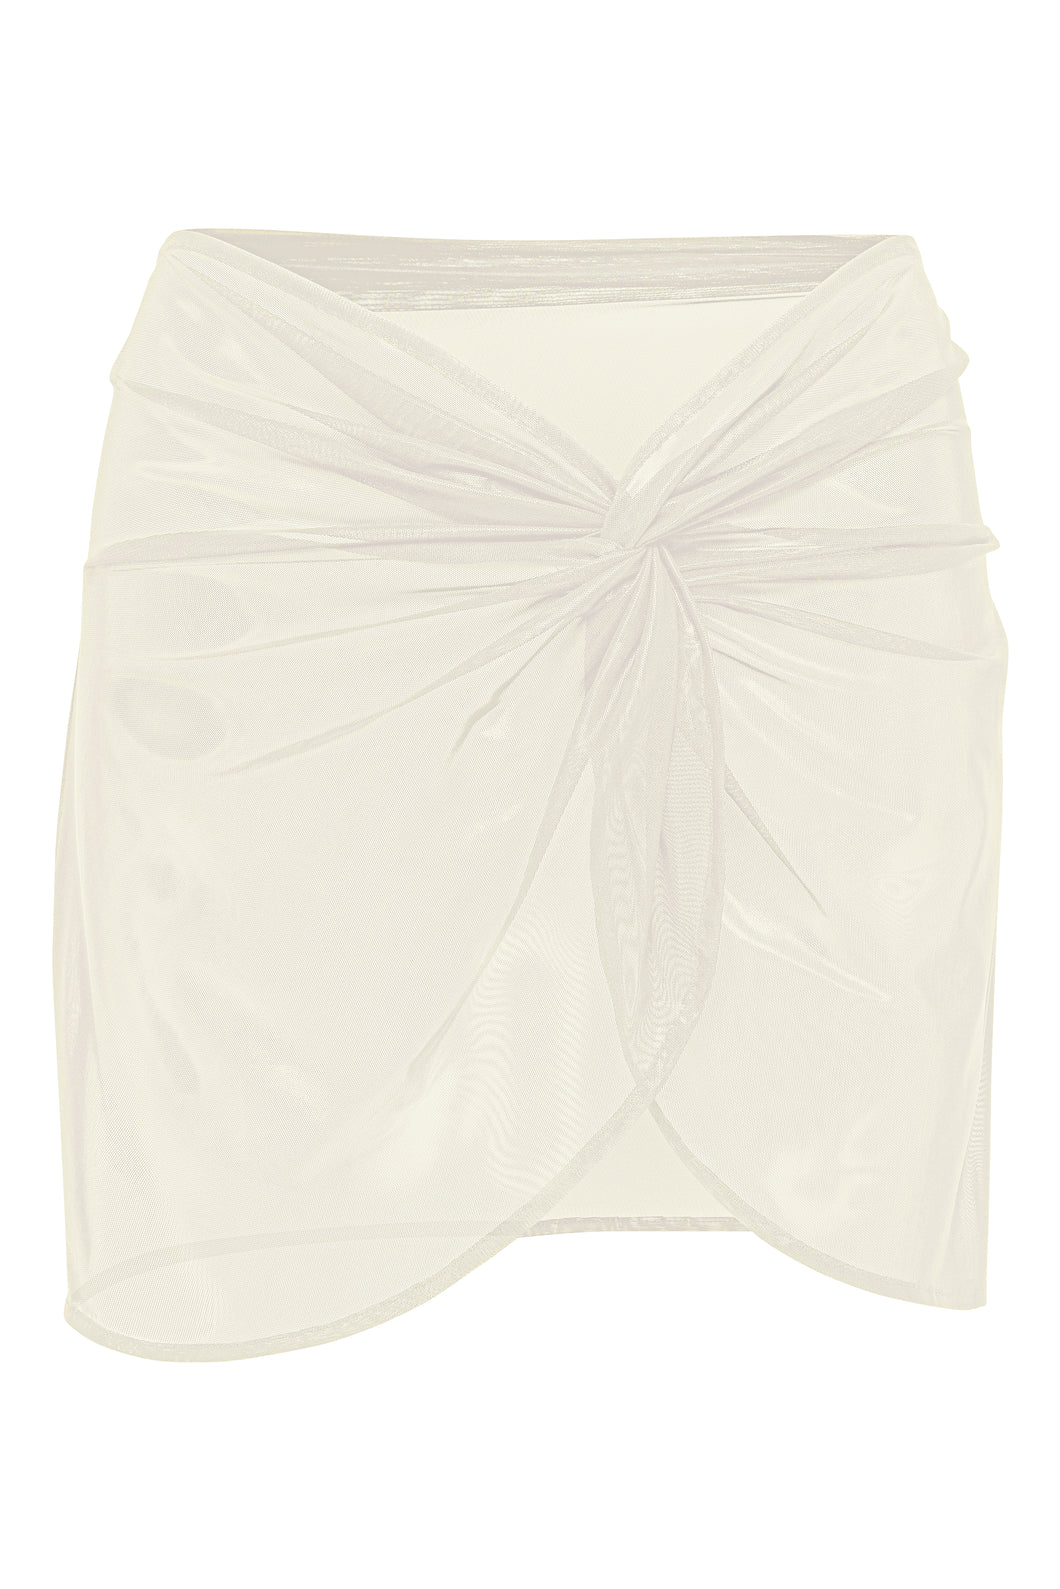 Flat image of the Mira Skirt in Ivory Sheer